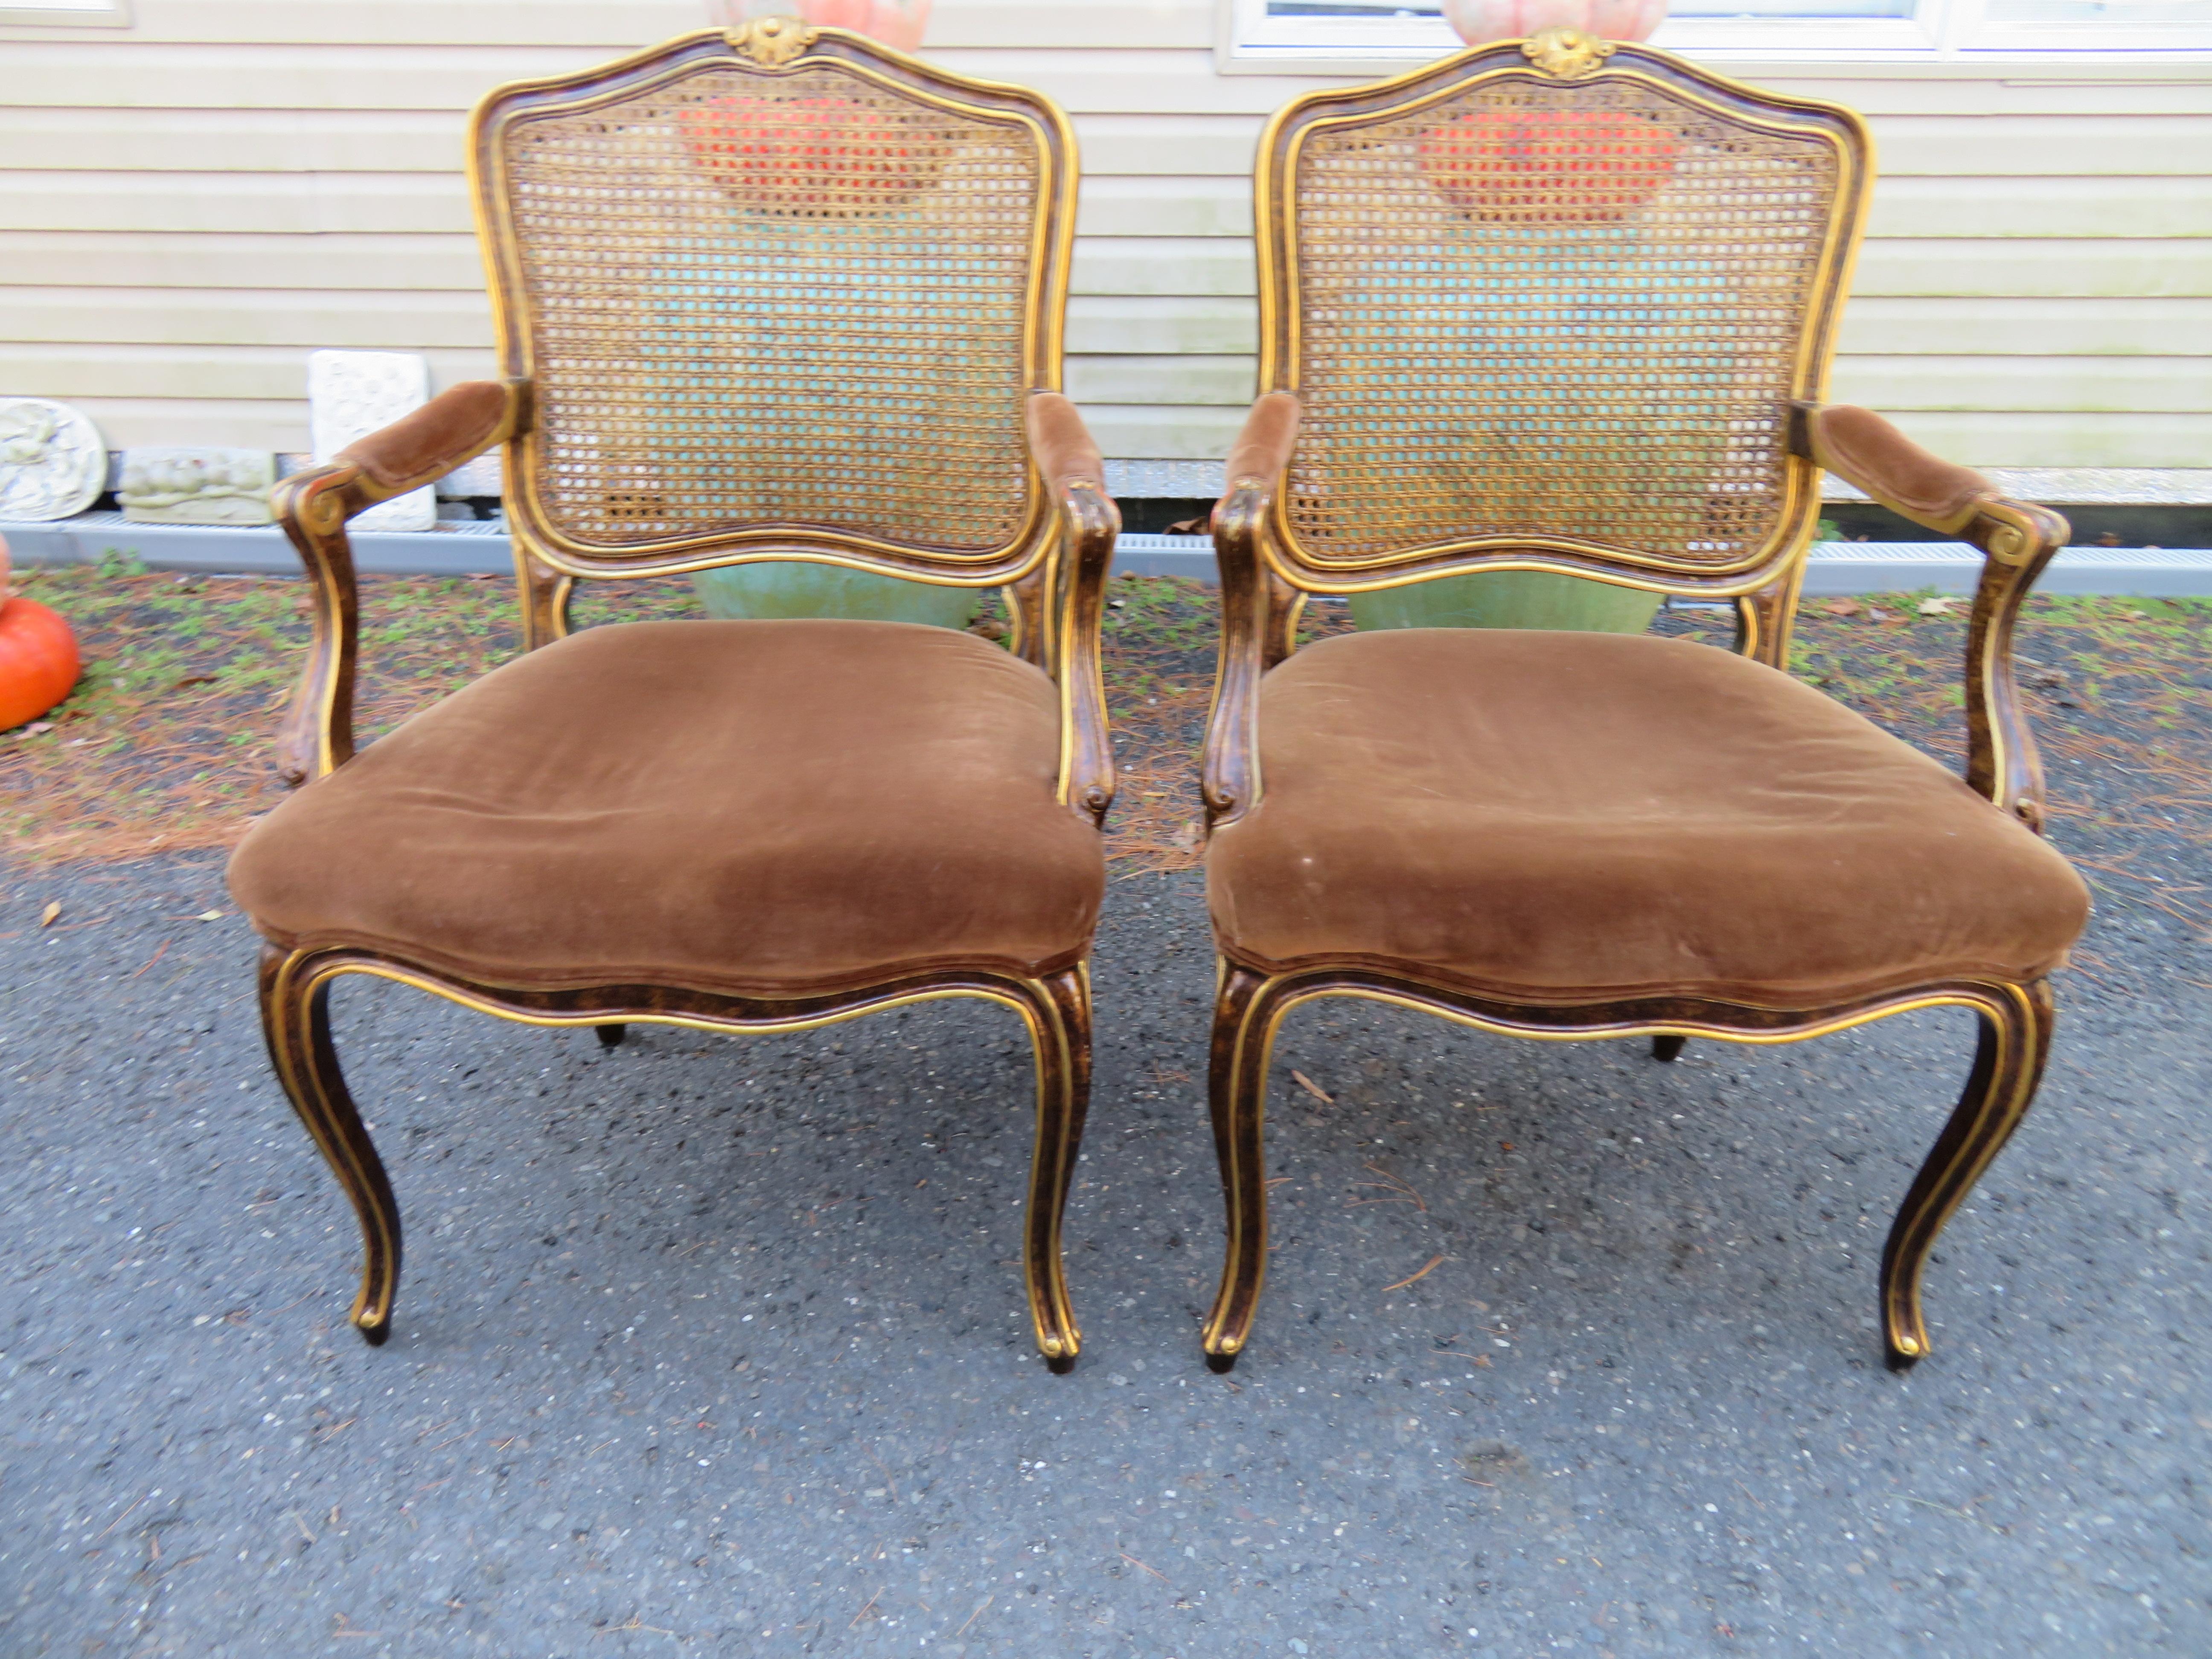 Spectacular pair of John Widdicomb caned back Louis XV Fauteuils chairs. We love the stunning original tortoise shell finish with gold details. These chairs retain their original chocolate brown velvet in presentable condition-we actually love the